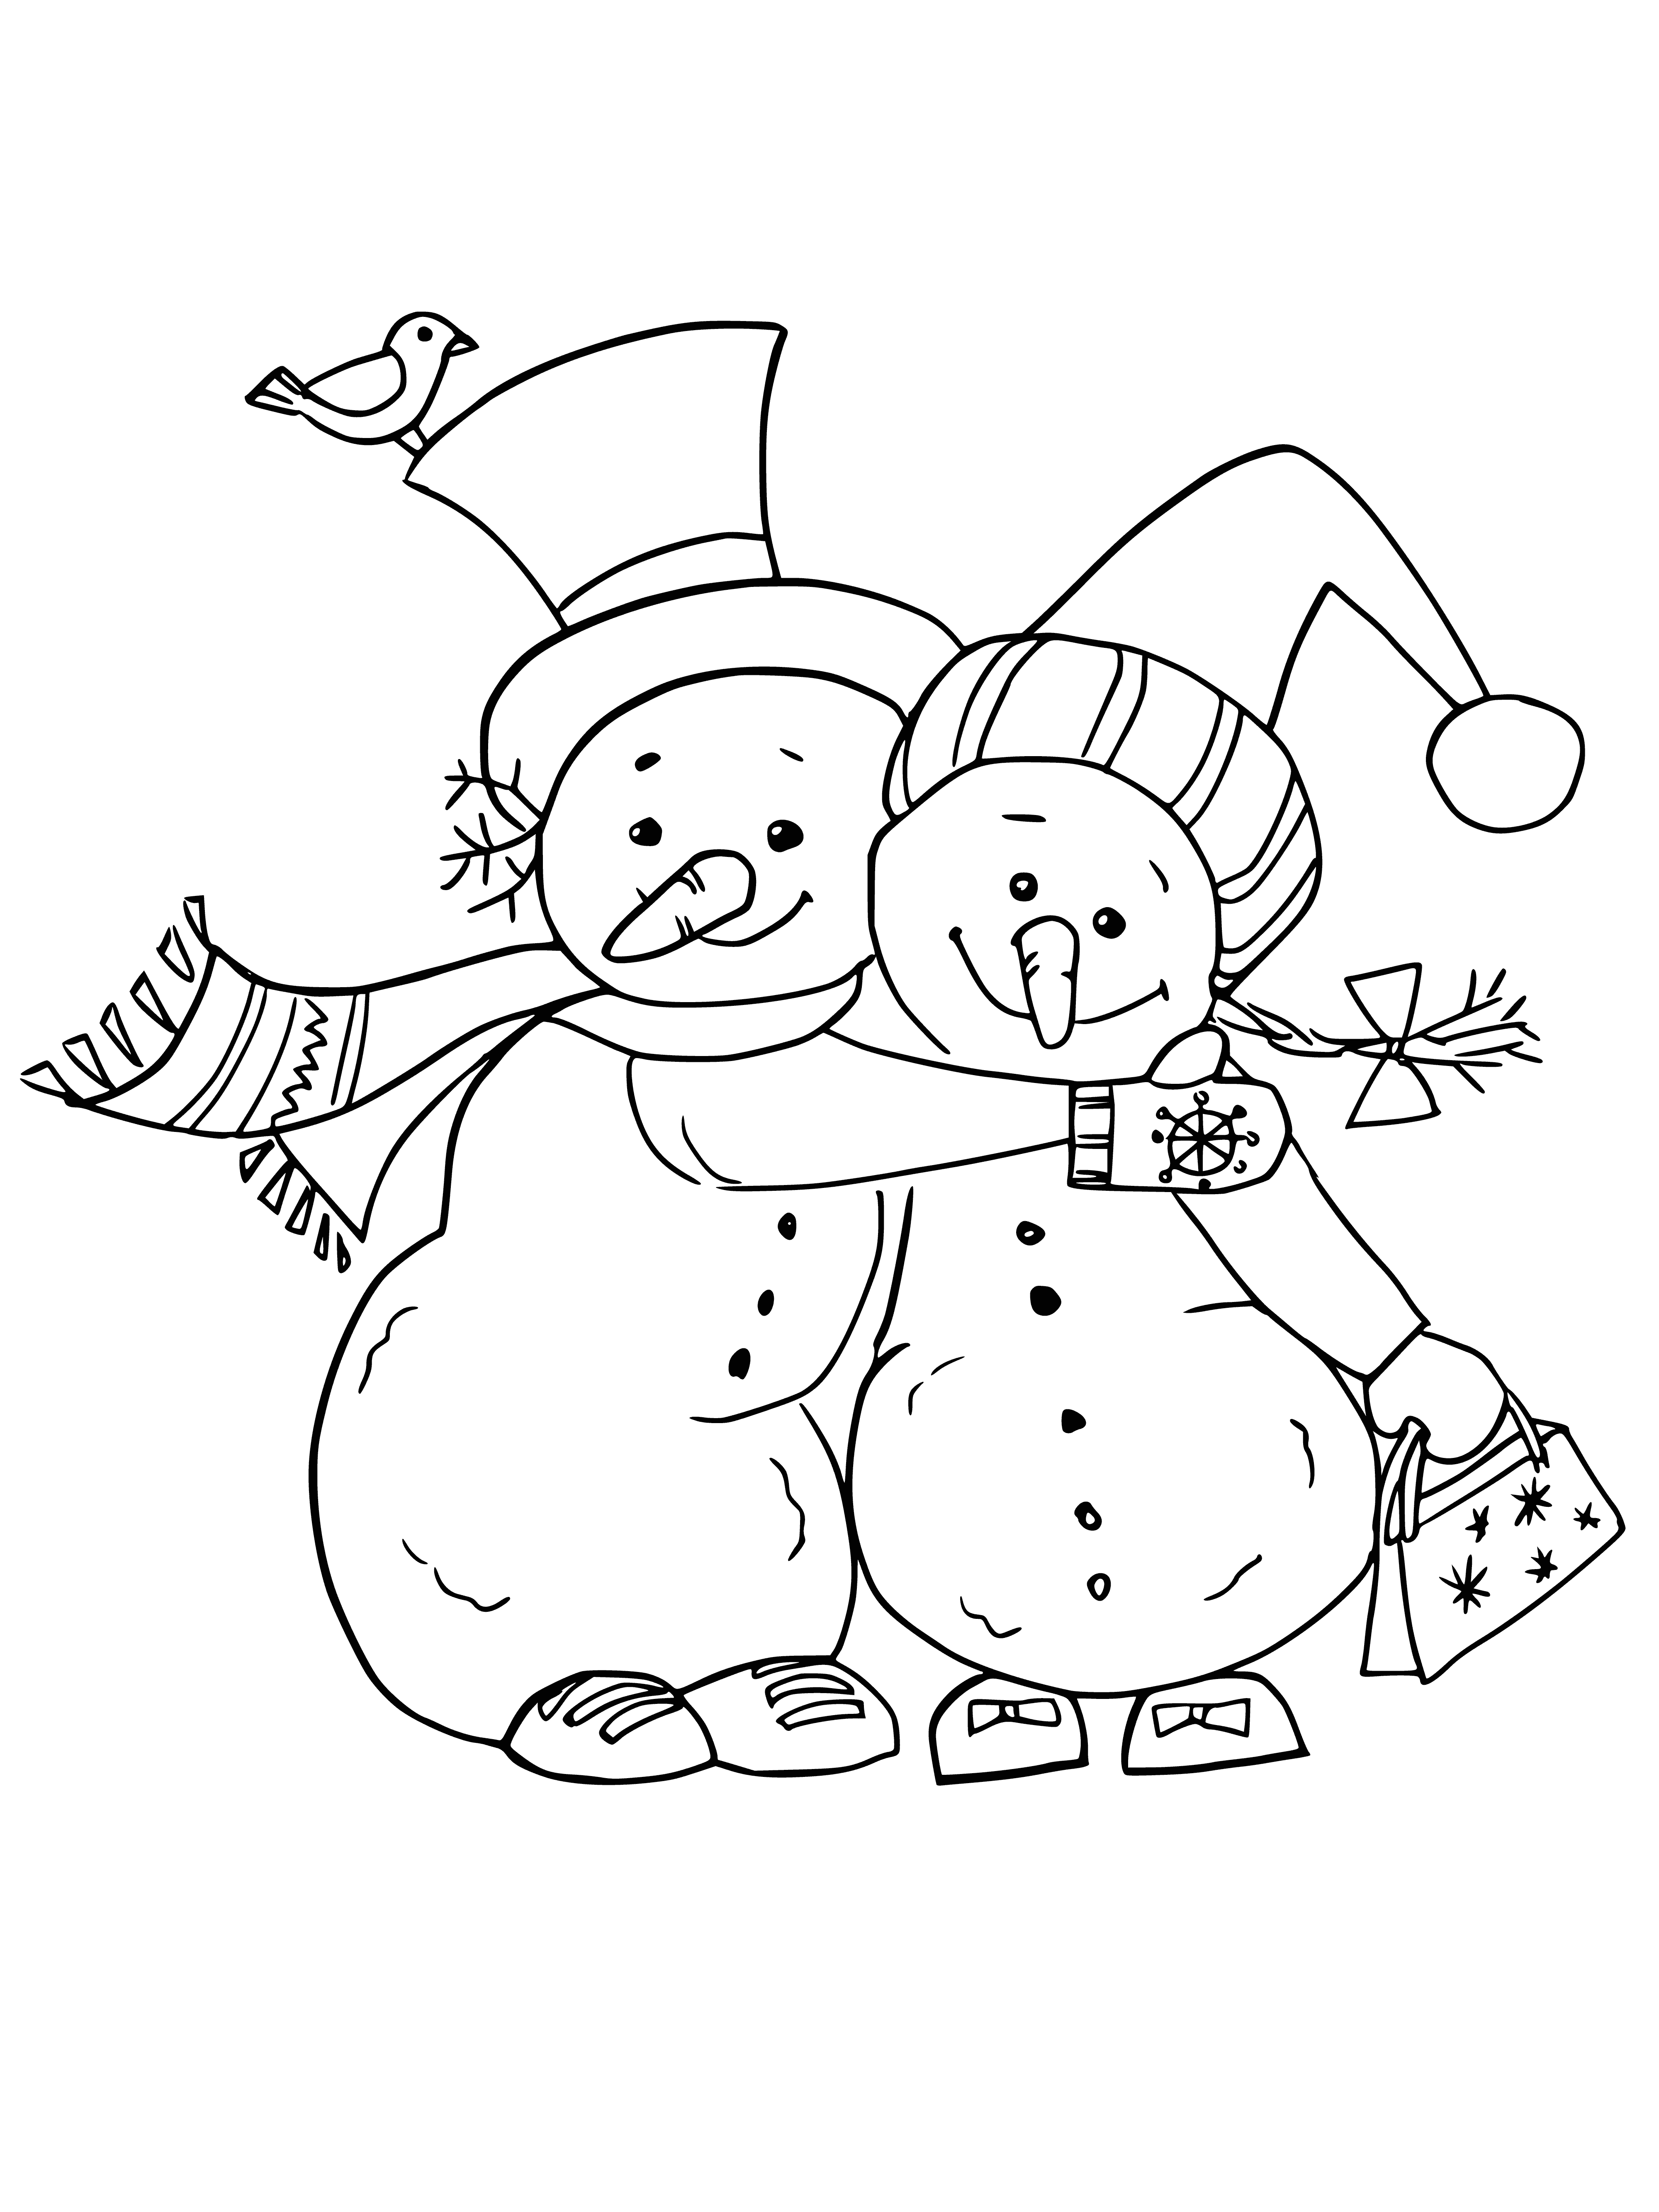 coloring page: Three snowmen ready for fun - tallest has orange carrot nose, middle green button nose, & smallest has red button nose & black top hat. Snow falling gently around them, standing on grass in front of brick wall.